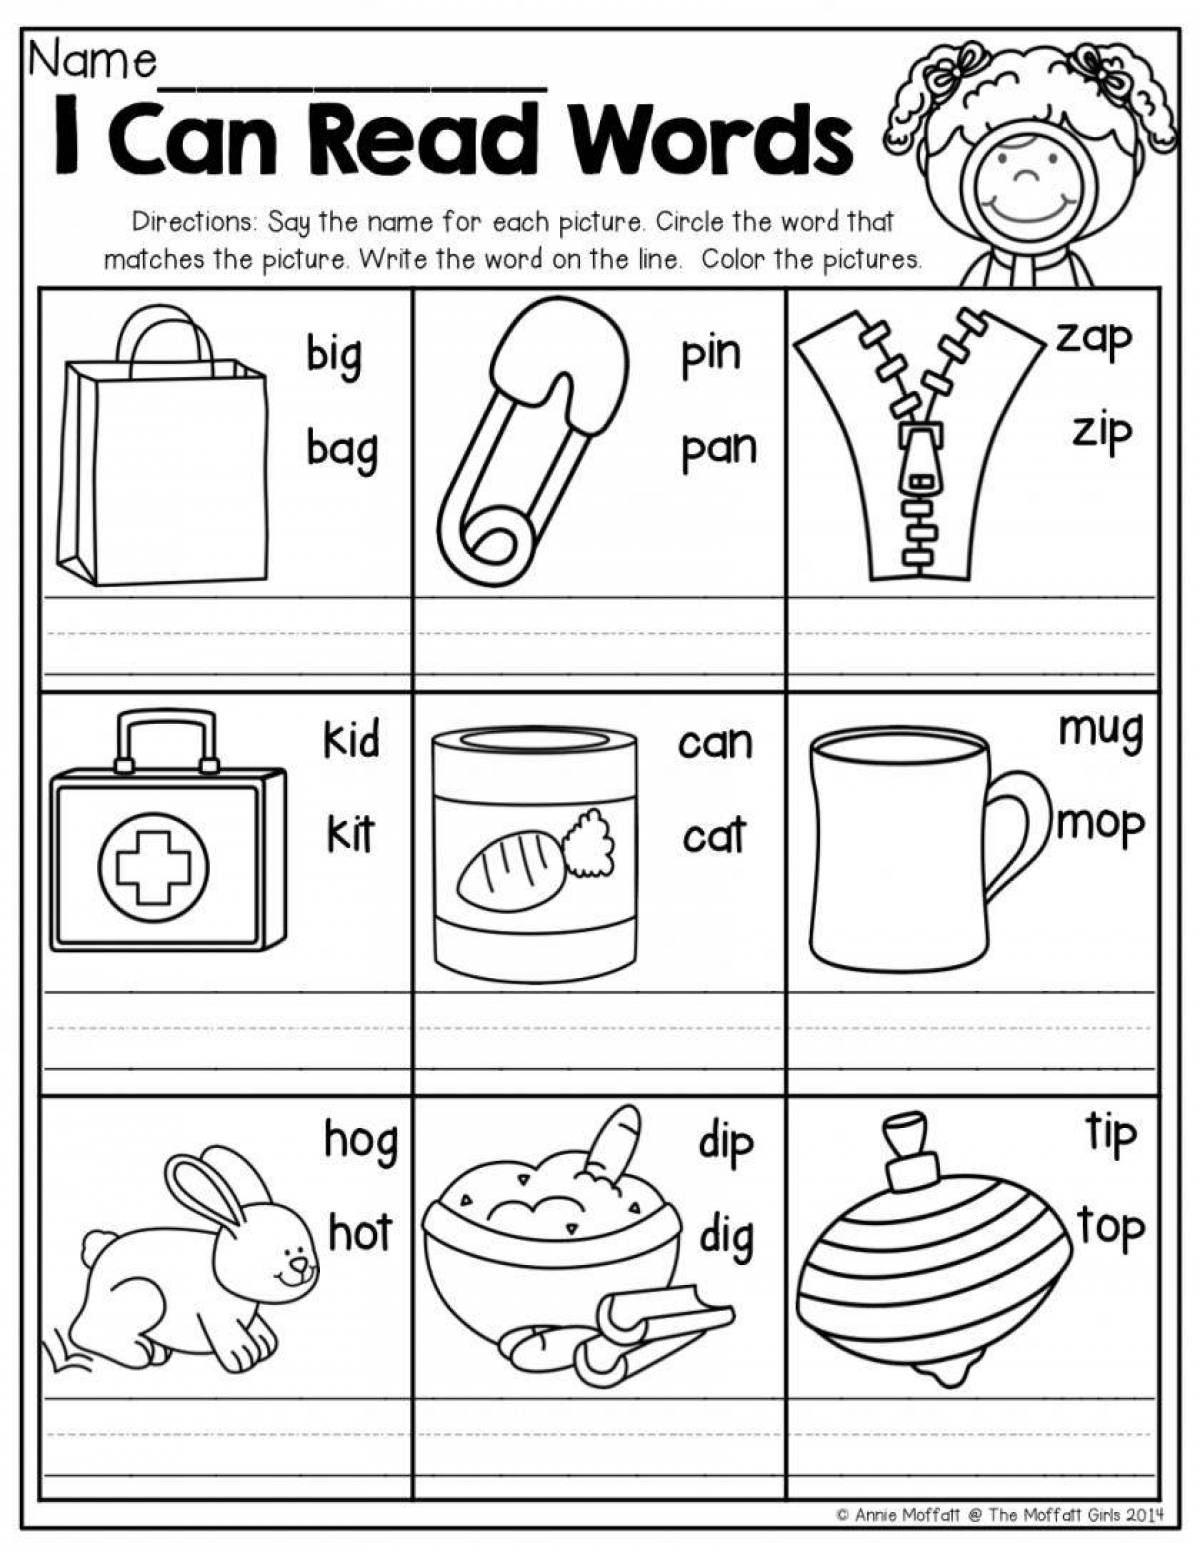 Color-explosive coloring page one level